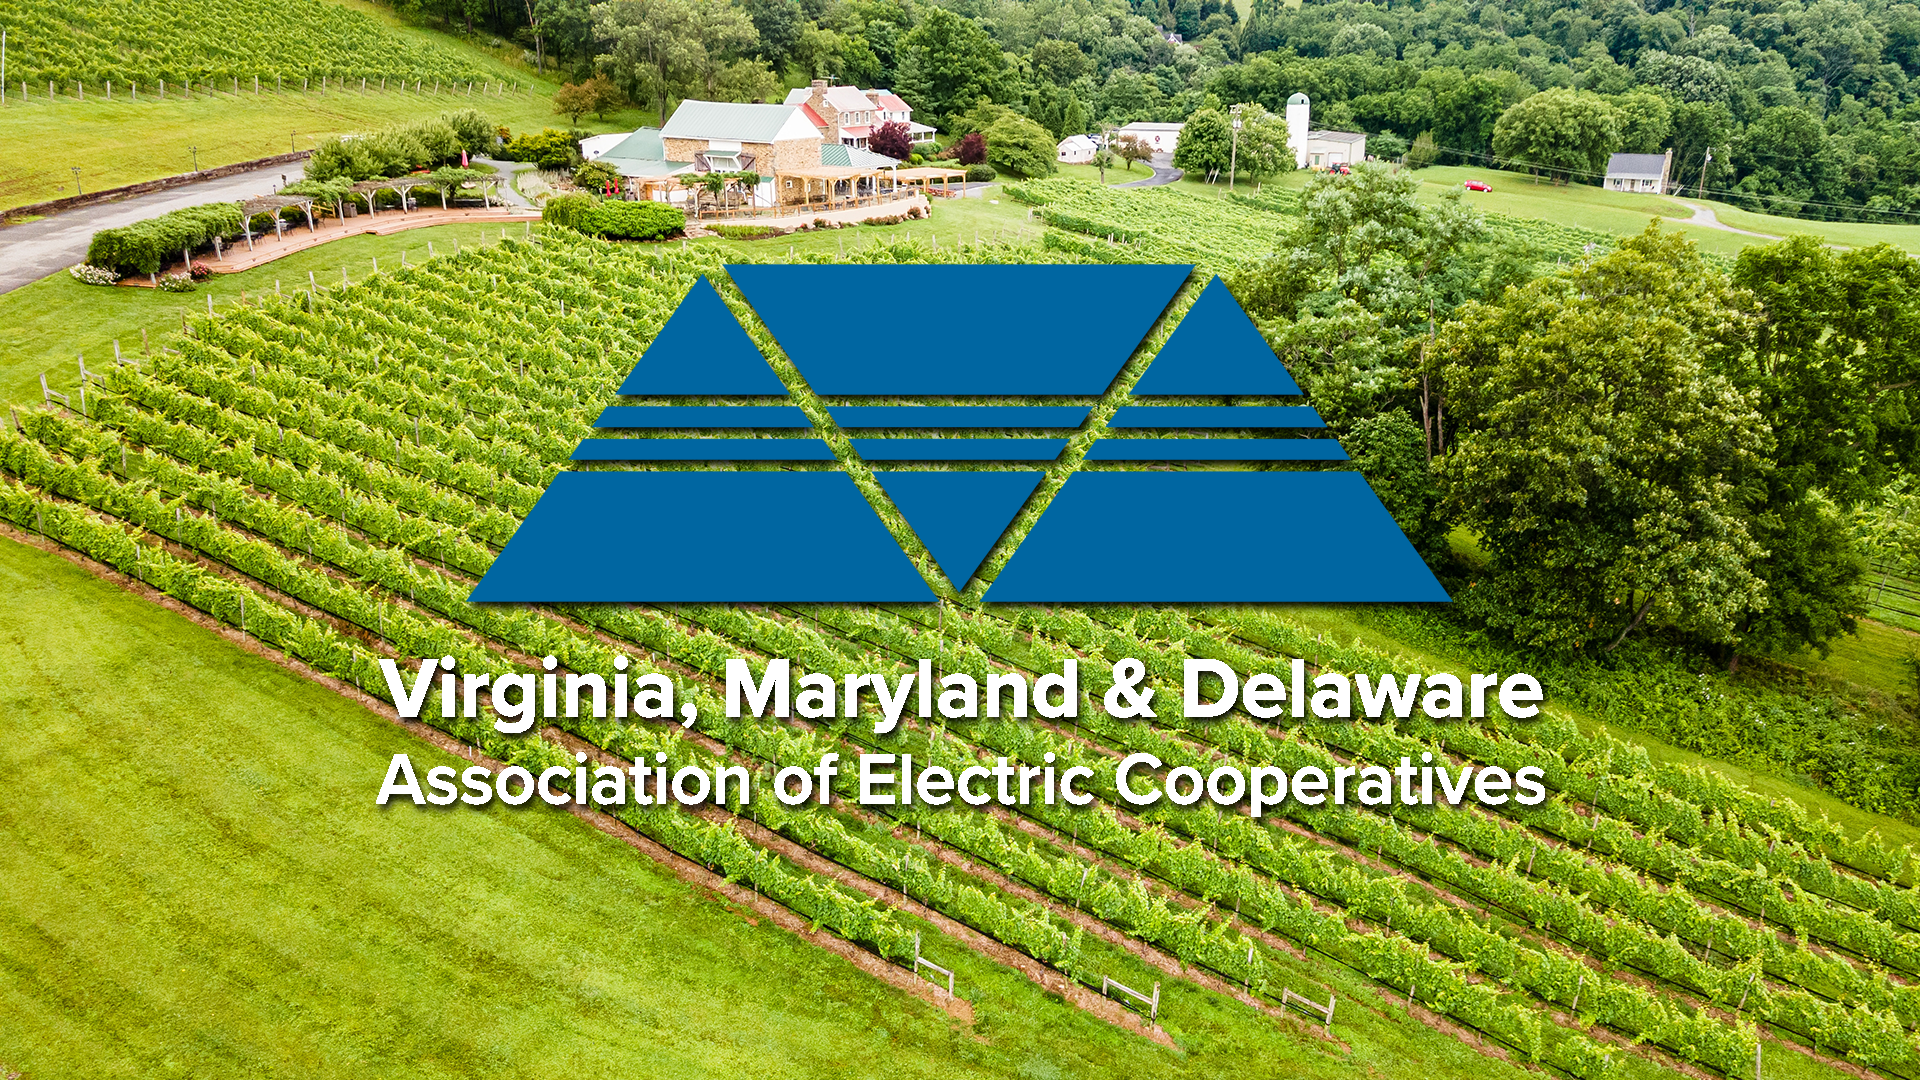 Virginia, Maryland, & Delaware Association of Electric Cooperatives Annual Meeting